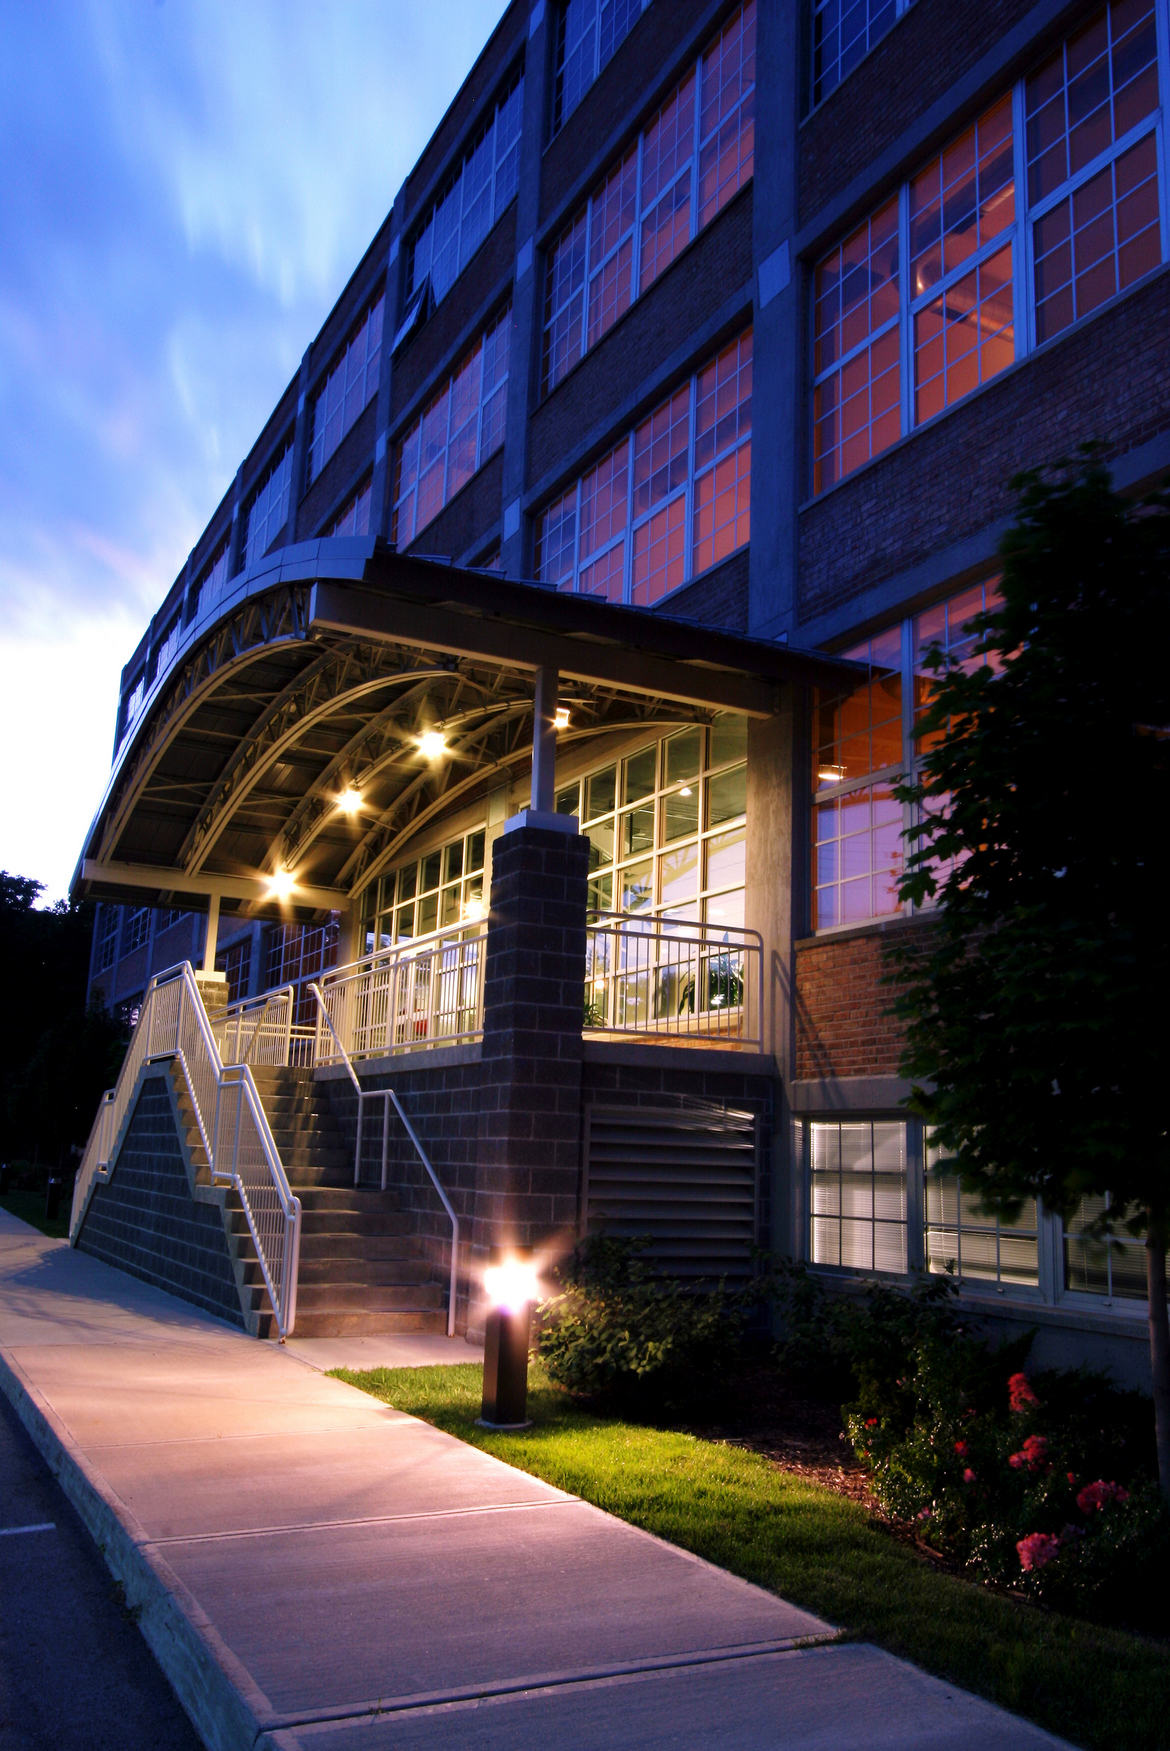 External view of entrance to a multi-family living complex at night. The stairs and the entrance are well lit.